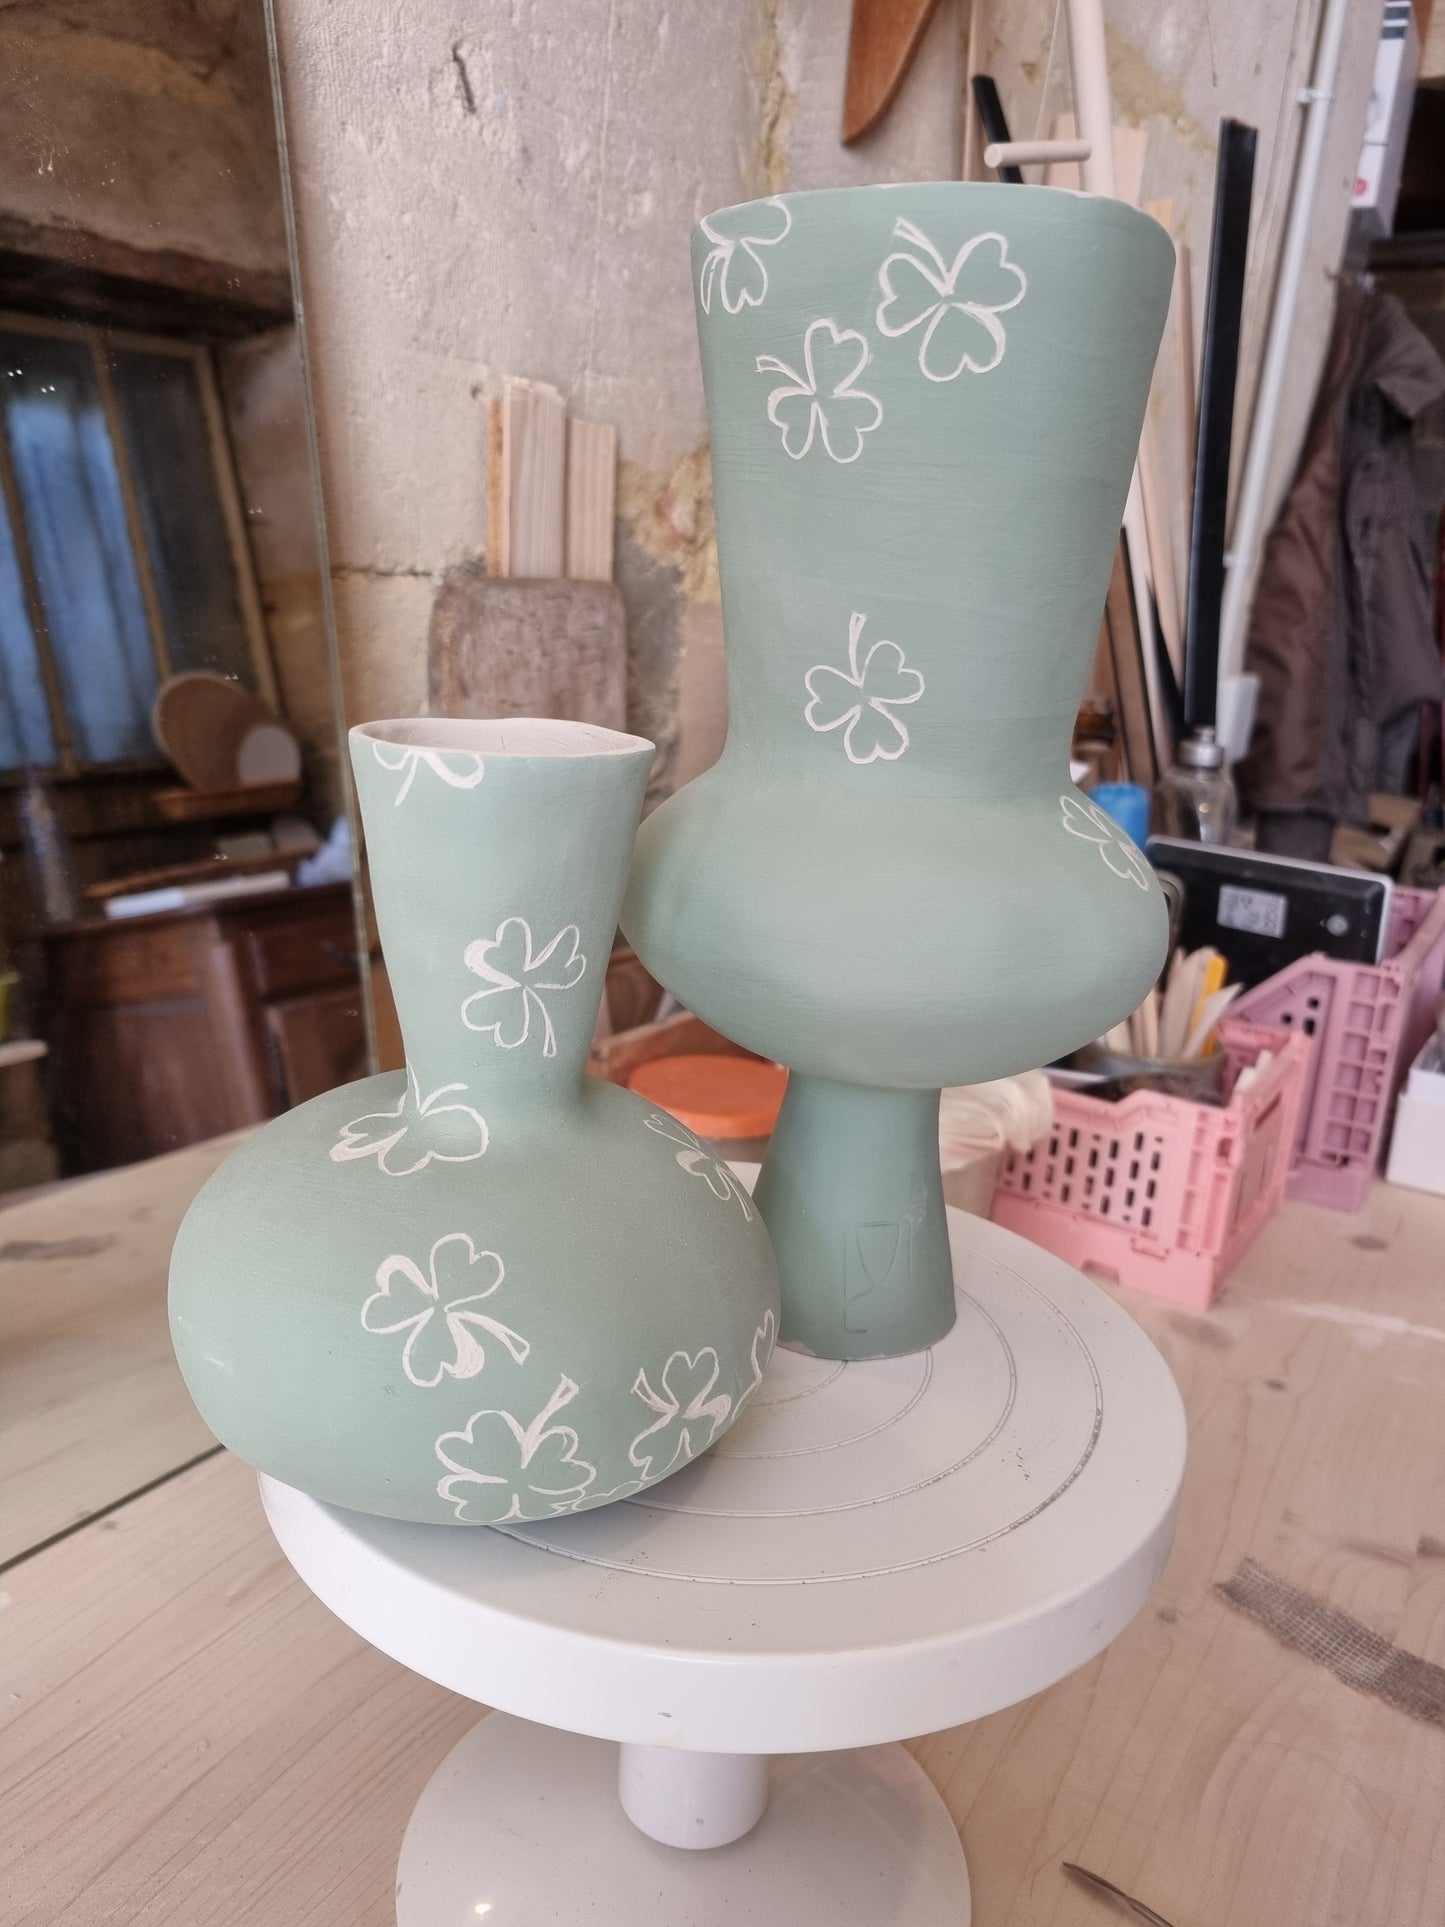 Vases find the Lucky clover